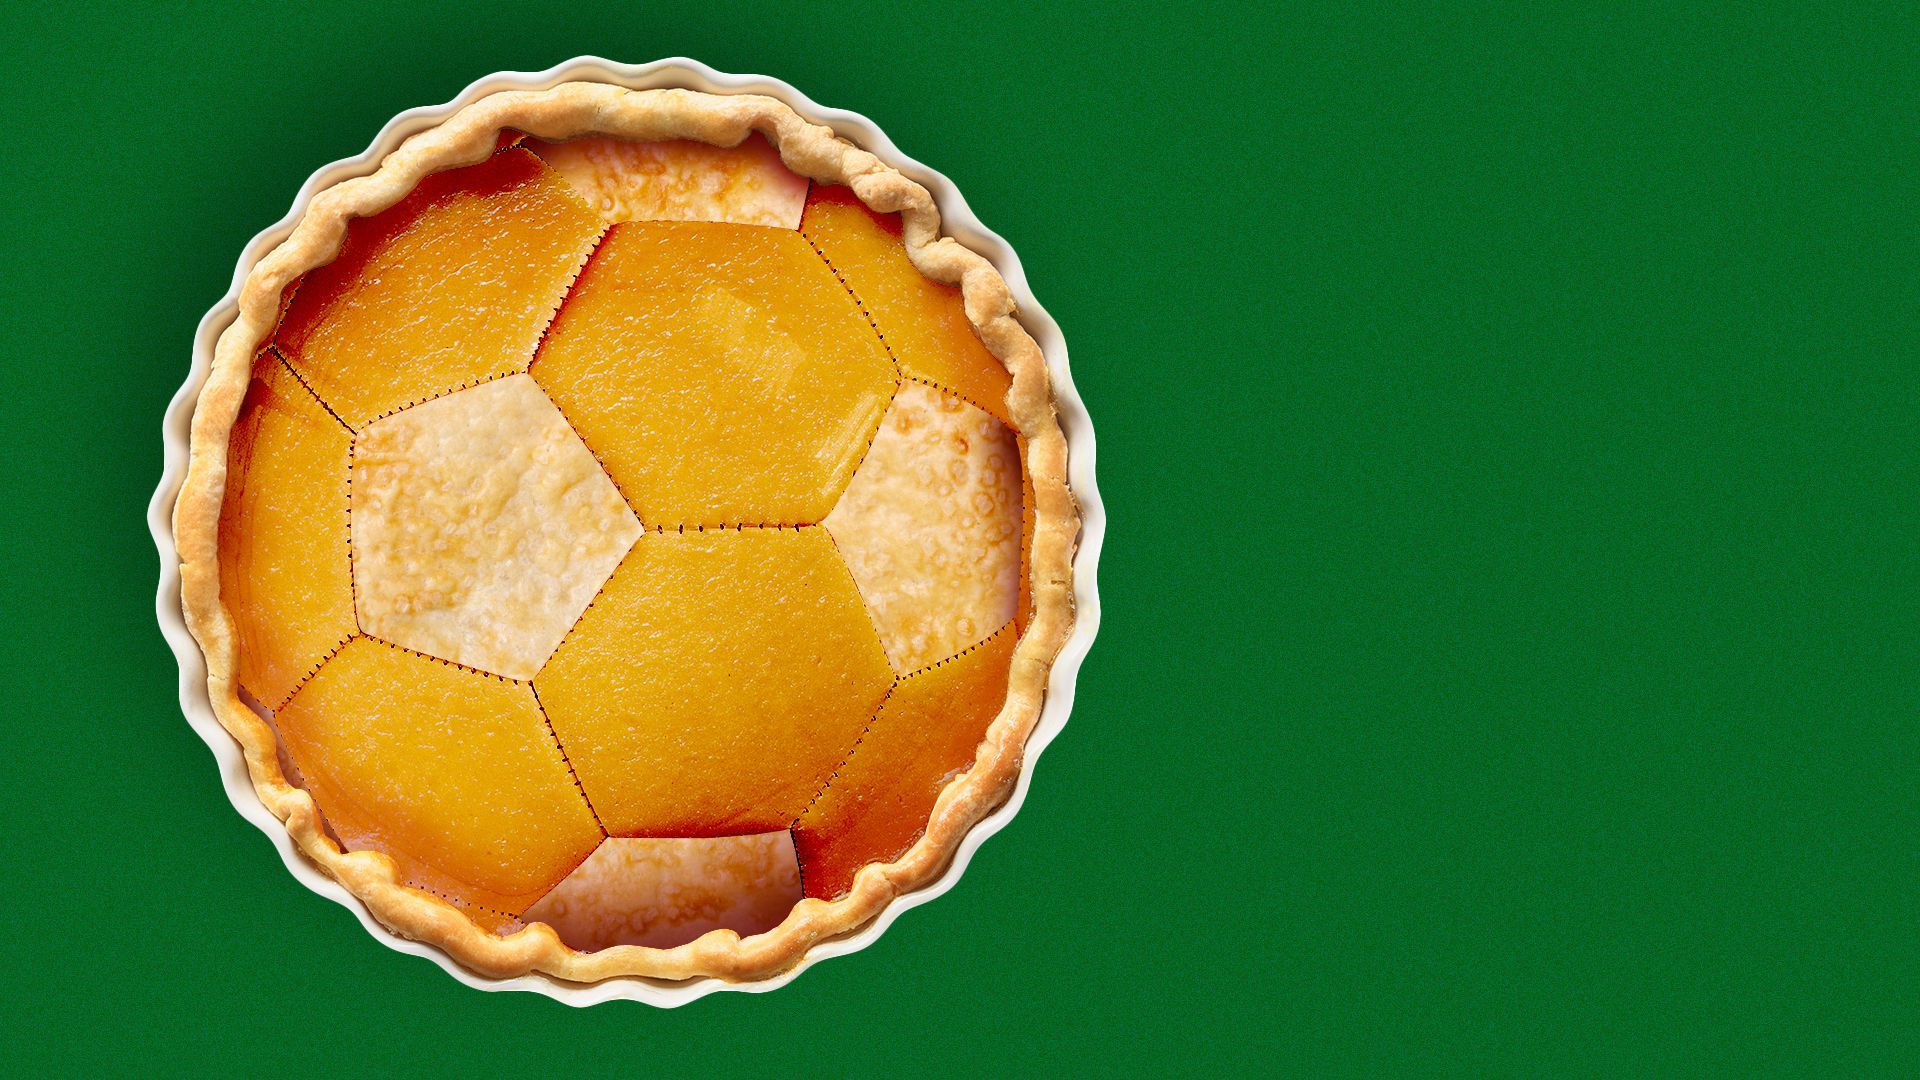 Illustration of a pumpkin pie with stitching and dough resembling a soccer ball